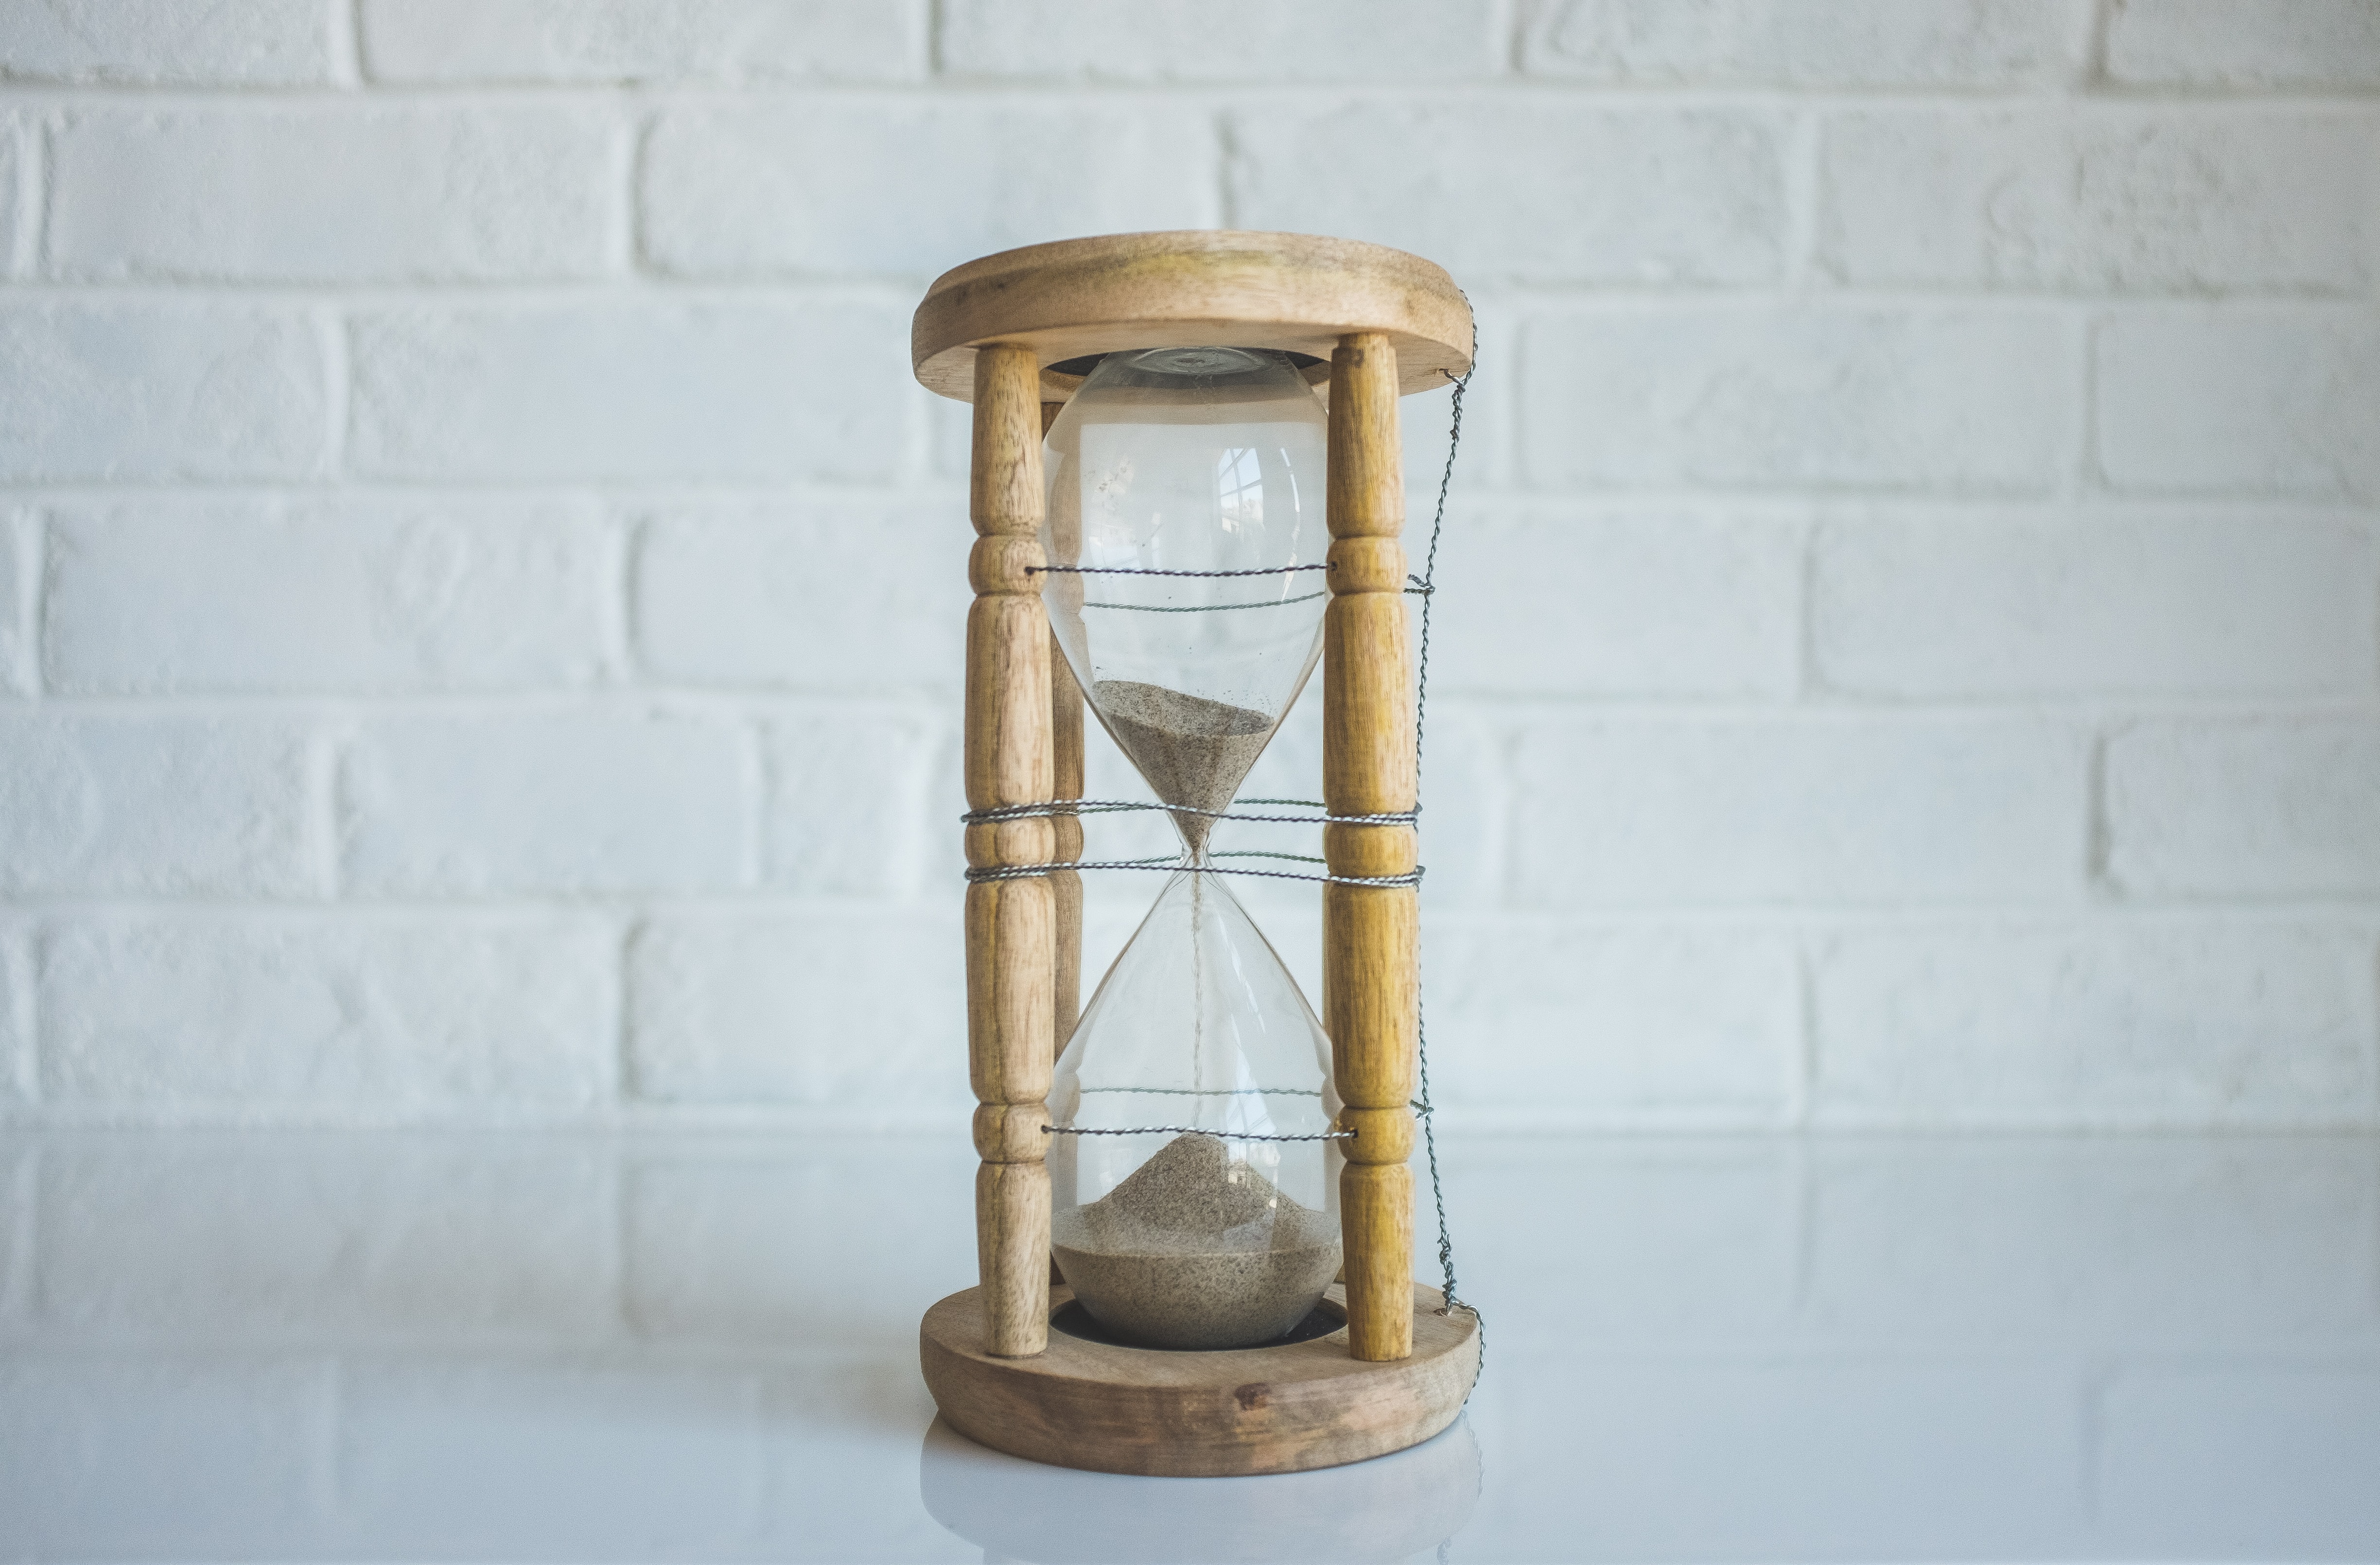 What to look for in a Voiceover Artist - An image of an hourglass